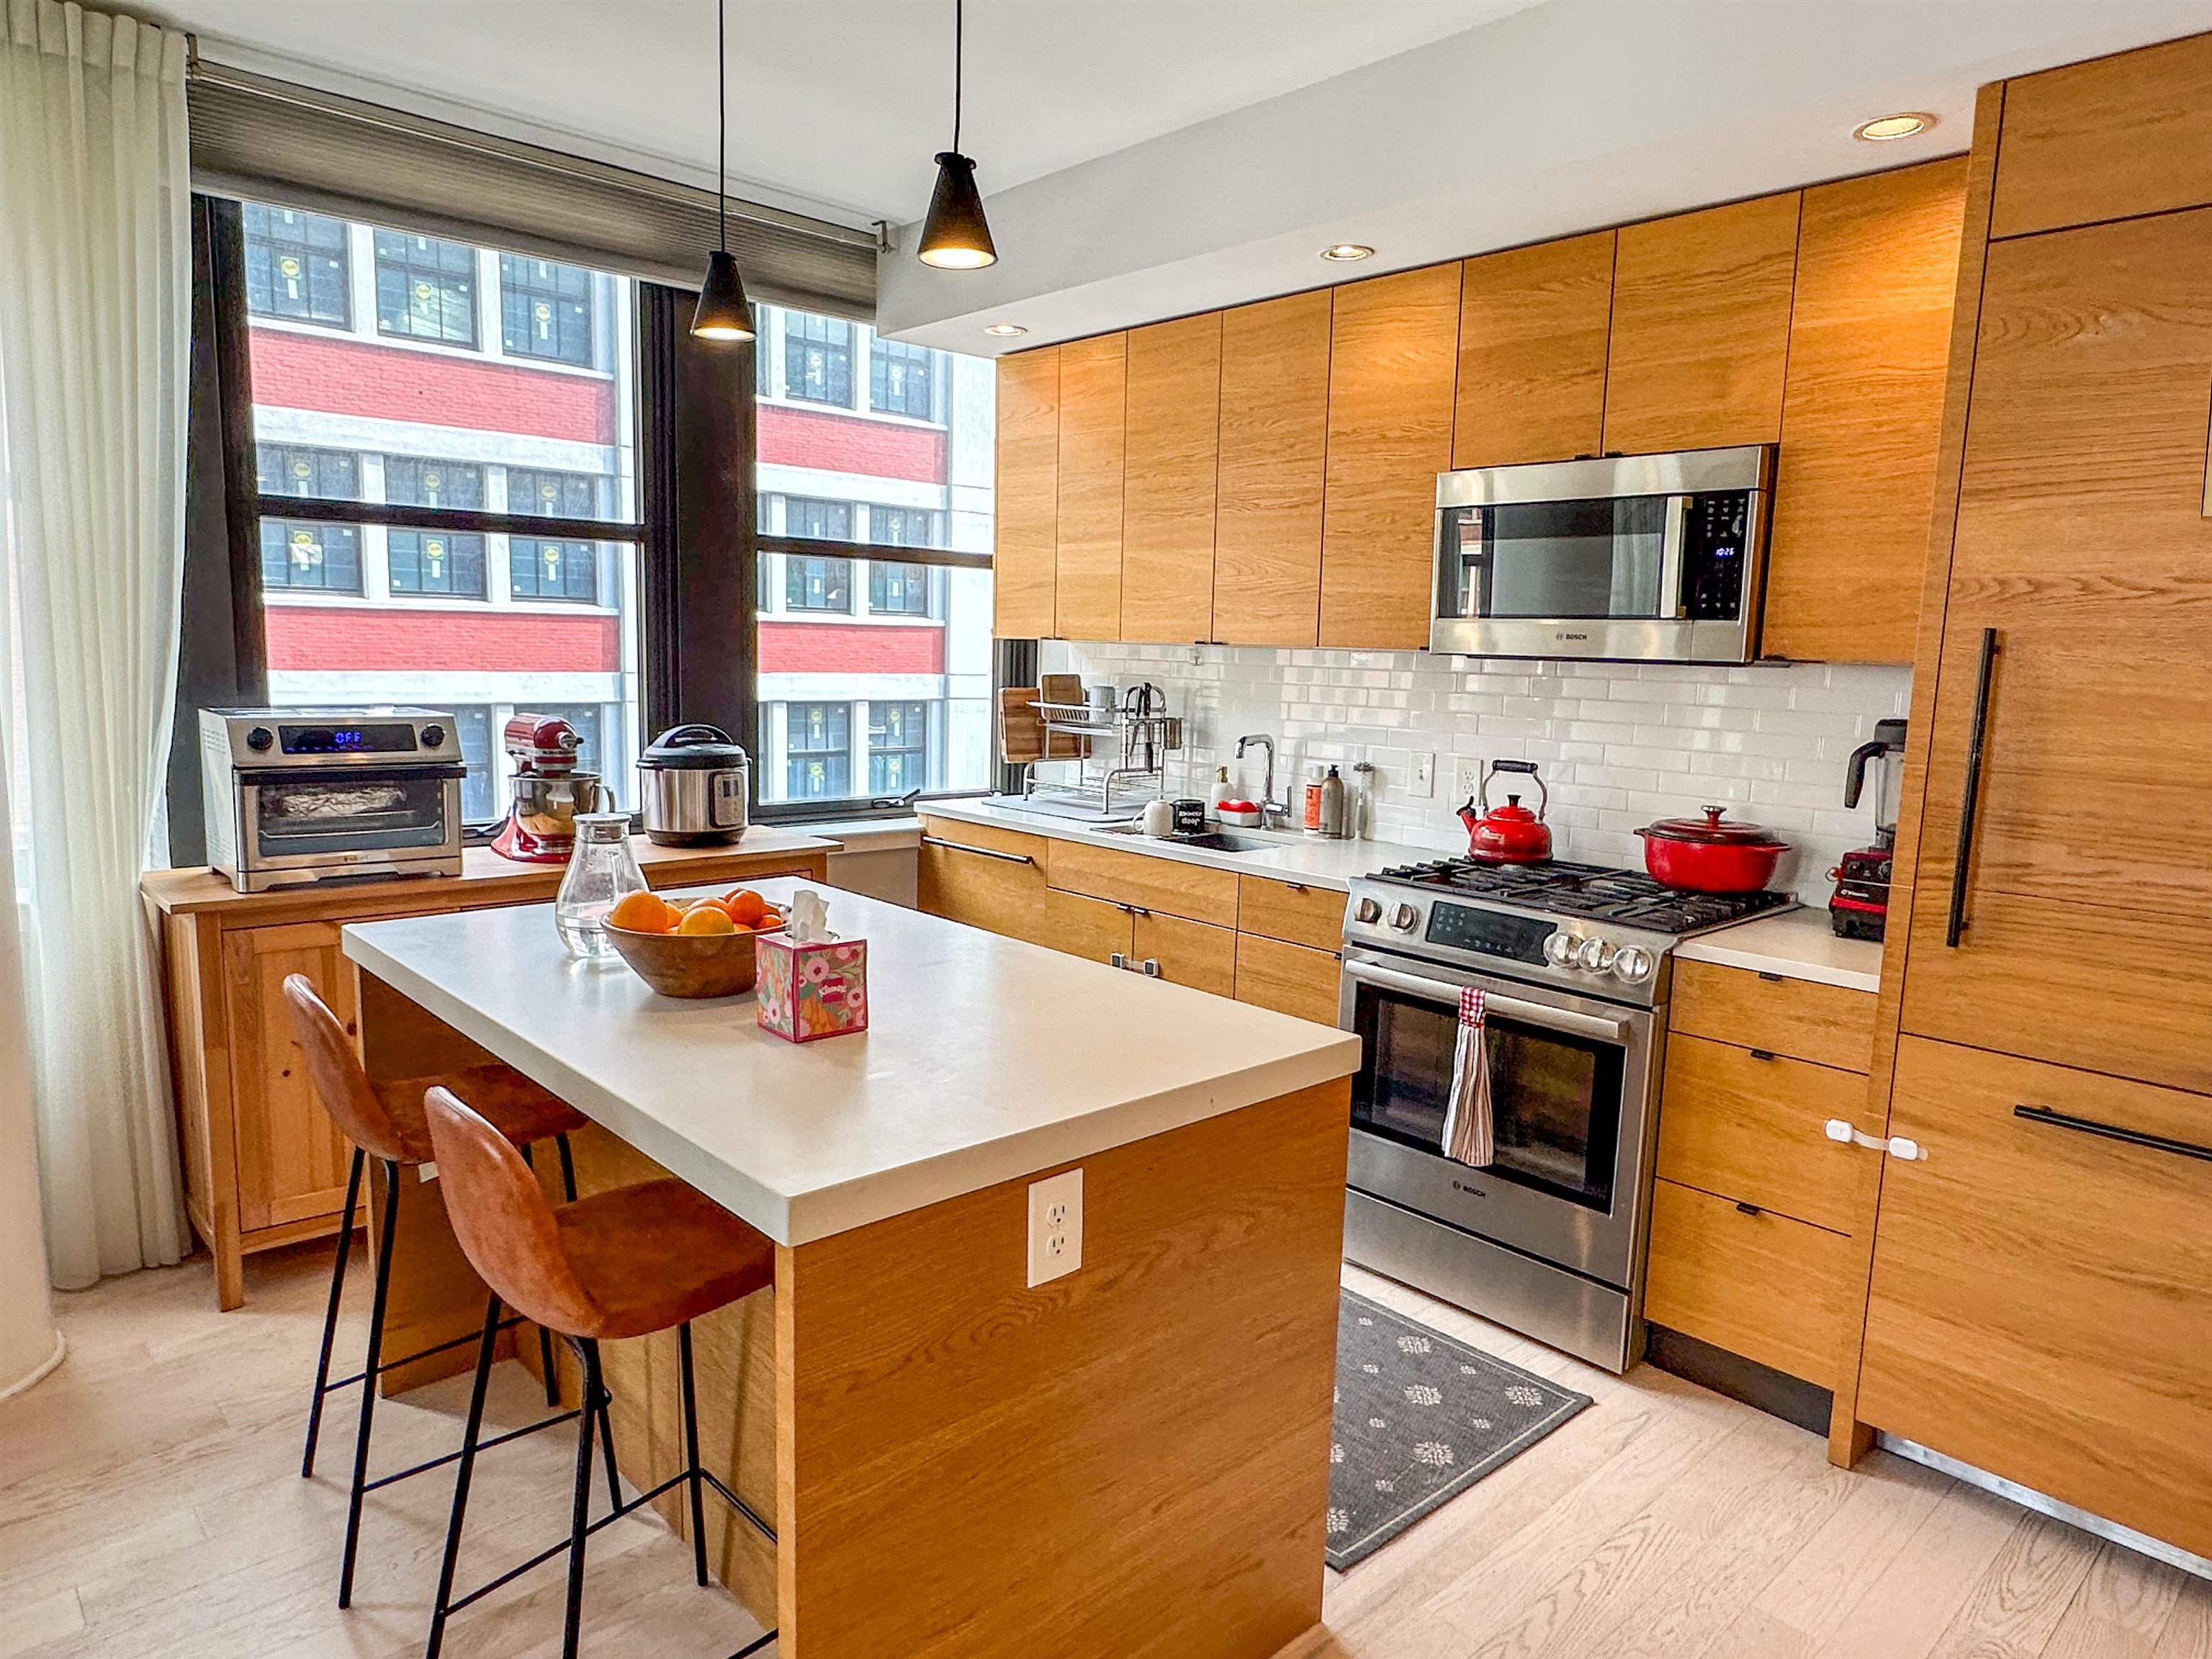 # 240009087 - For Rent in JERSEY CITY - Downtown NJ